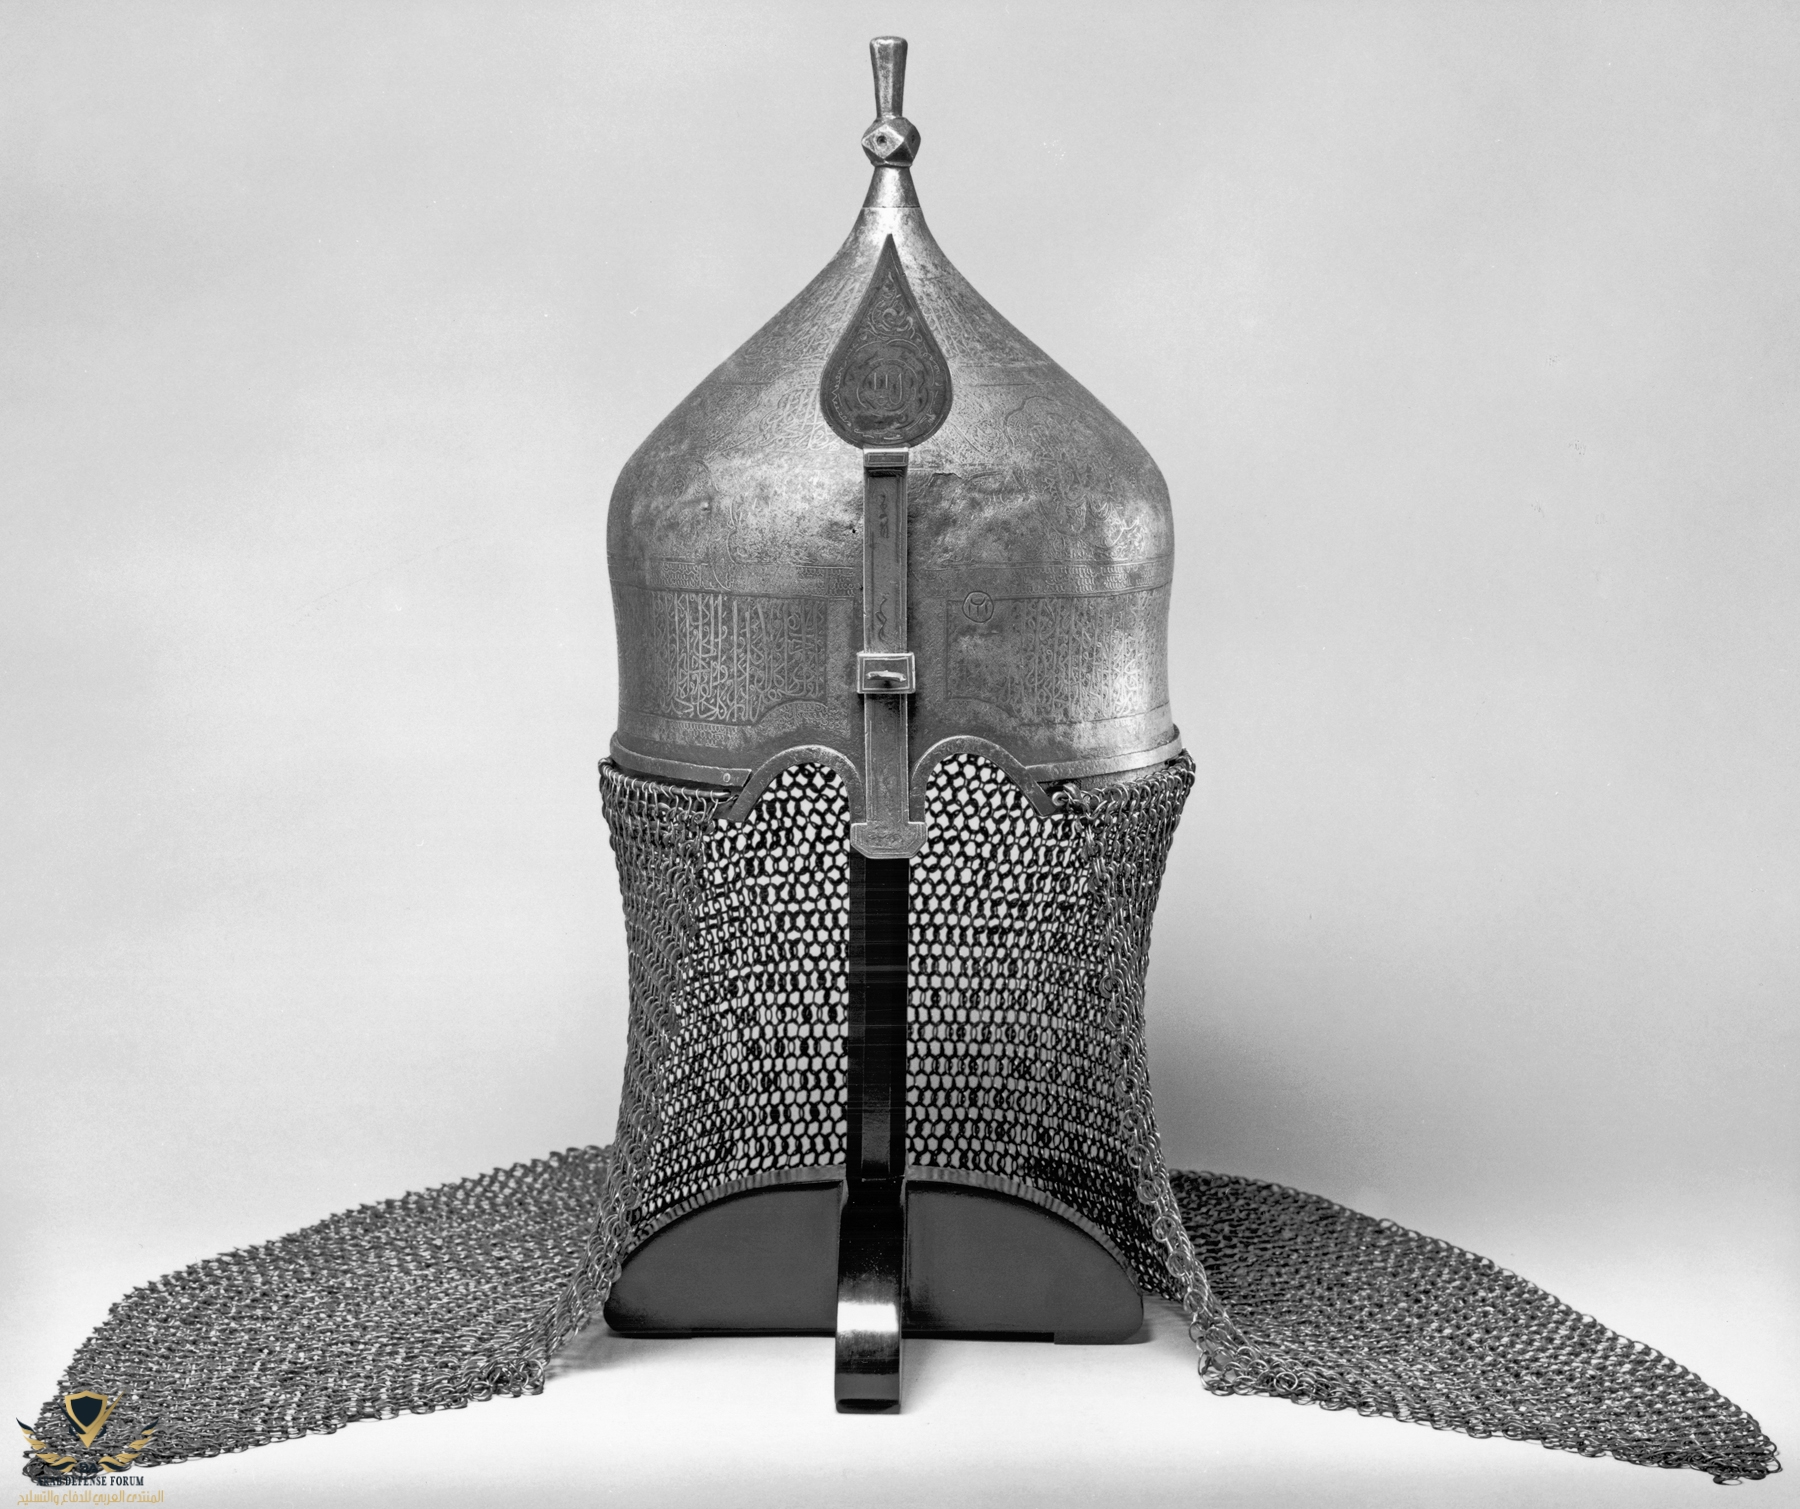 Ottoman_or_Persian_-_Inscribed_Helmet_with_Neck_Guard_of_Mail_and_Nose_Guard_-_Walters_5174.jpg